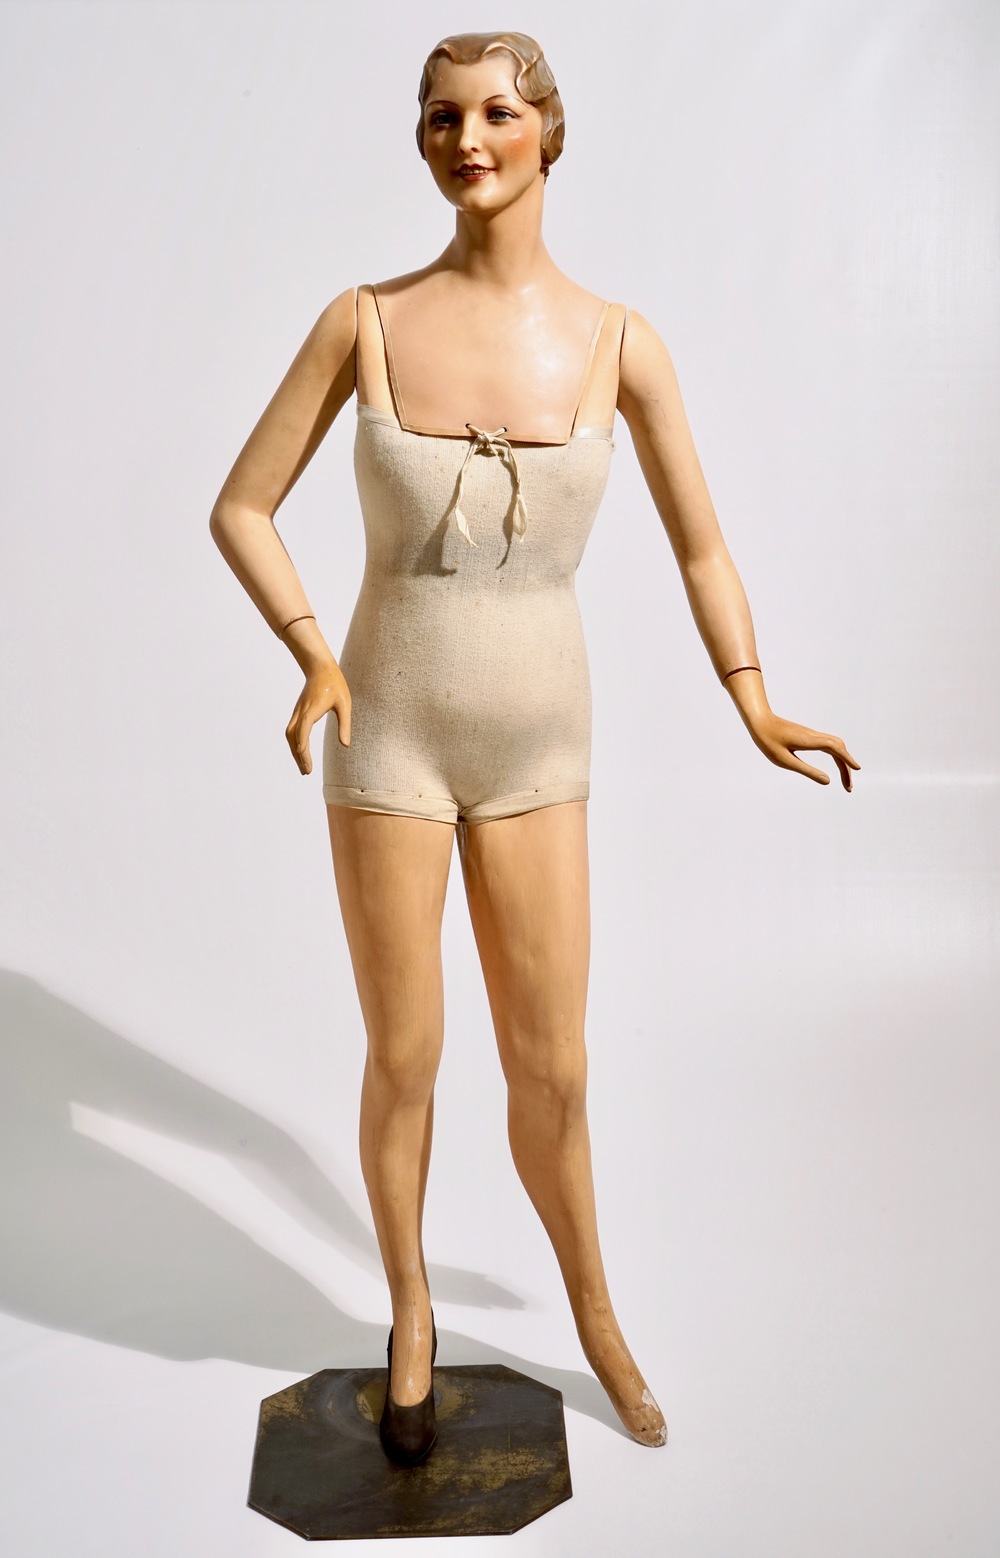 A French wax head mannequin doll of a lady, probably Pierre Imans, Paris, ca. 1920